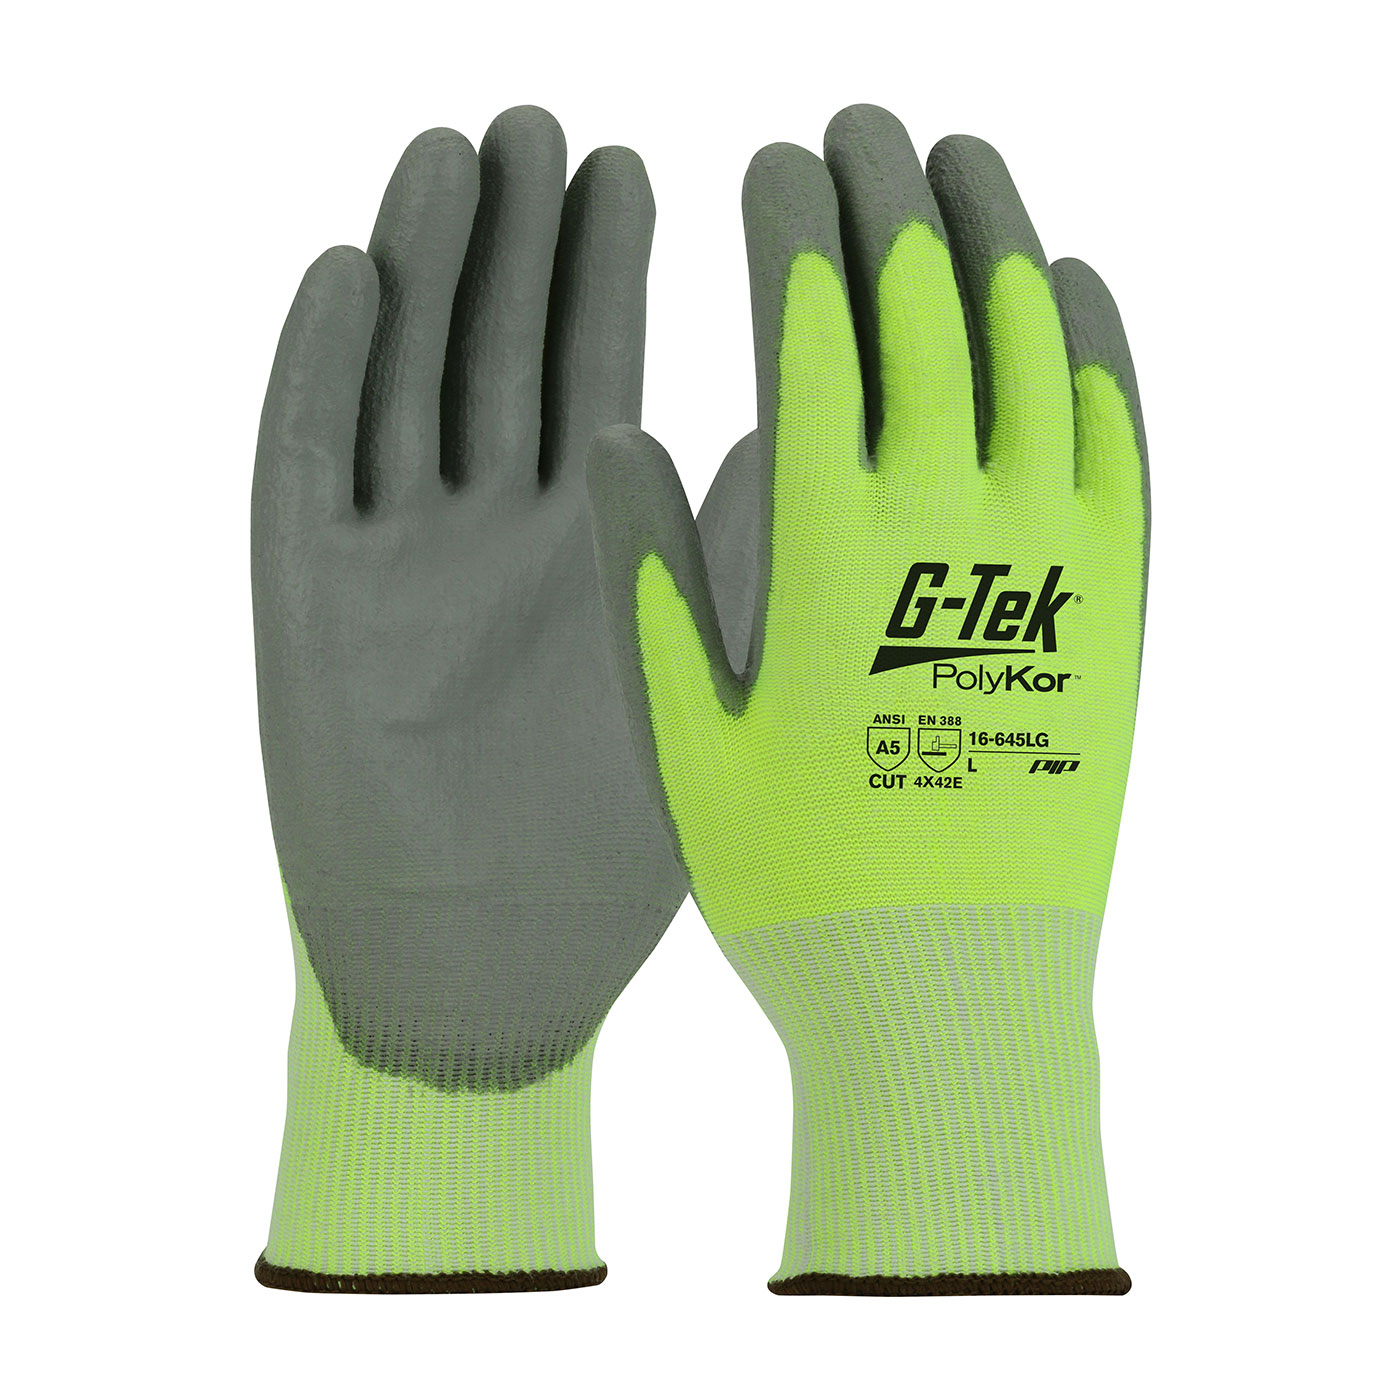 PIP 16-645LG/S G-Tek PolyKor Seamless Knit PolyKor Blended Glove with Polyurethane Coated Smooth Grip on Palm & Fingers - Small PID-16645LGS